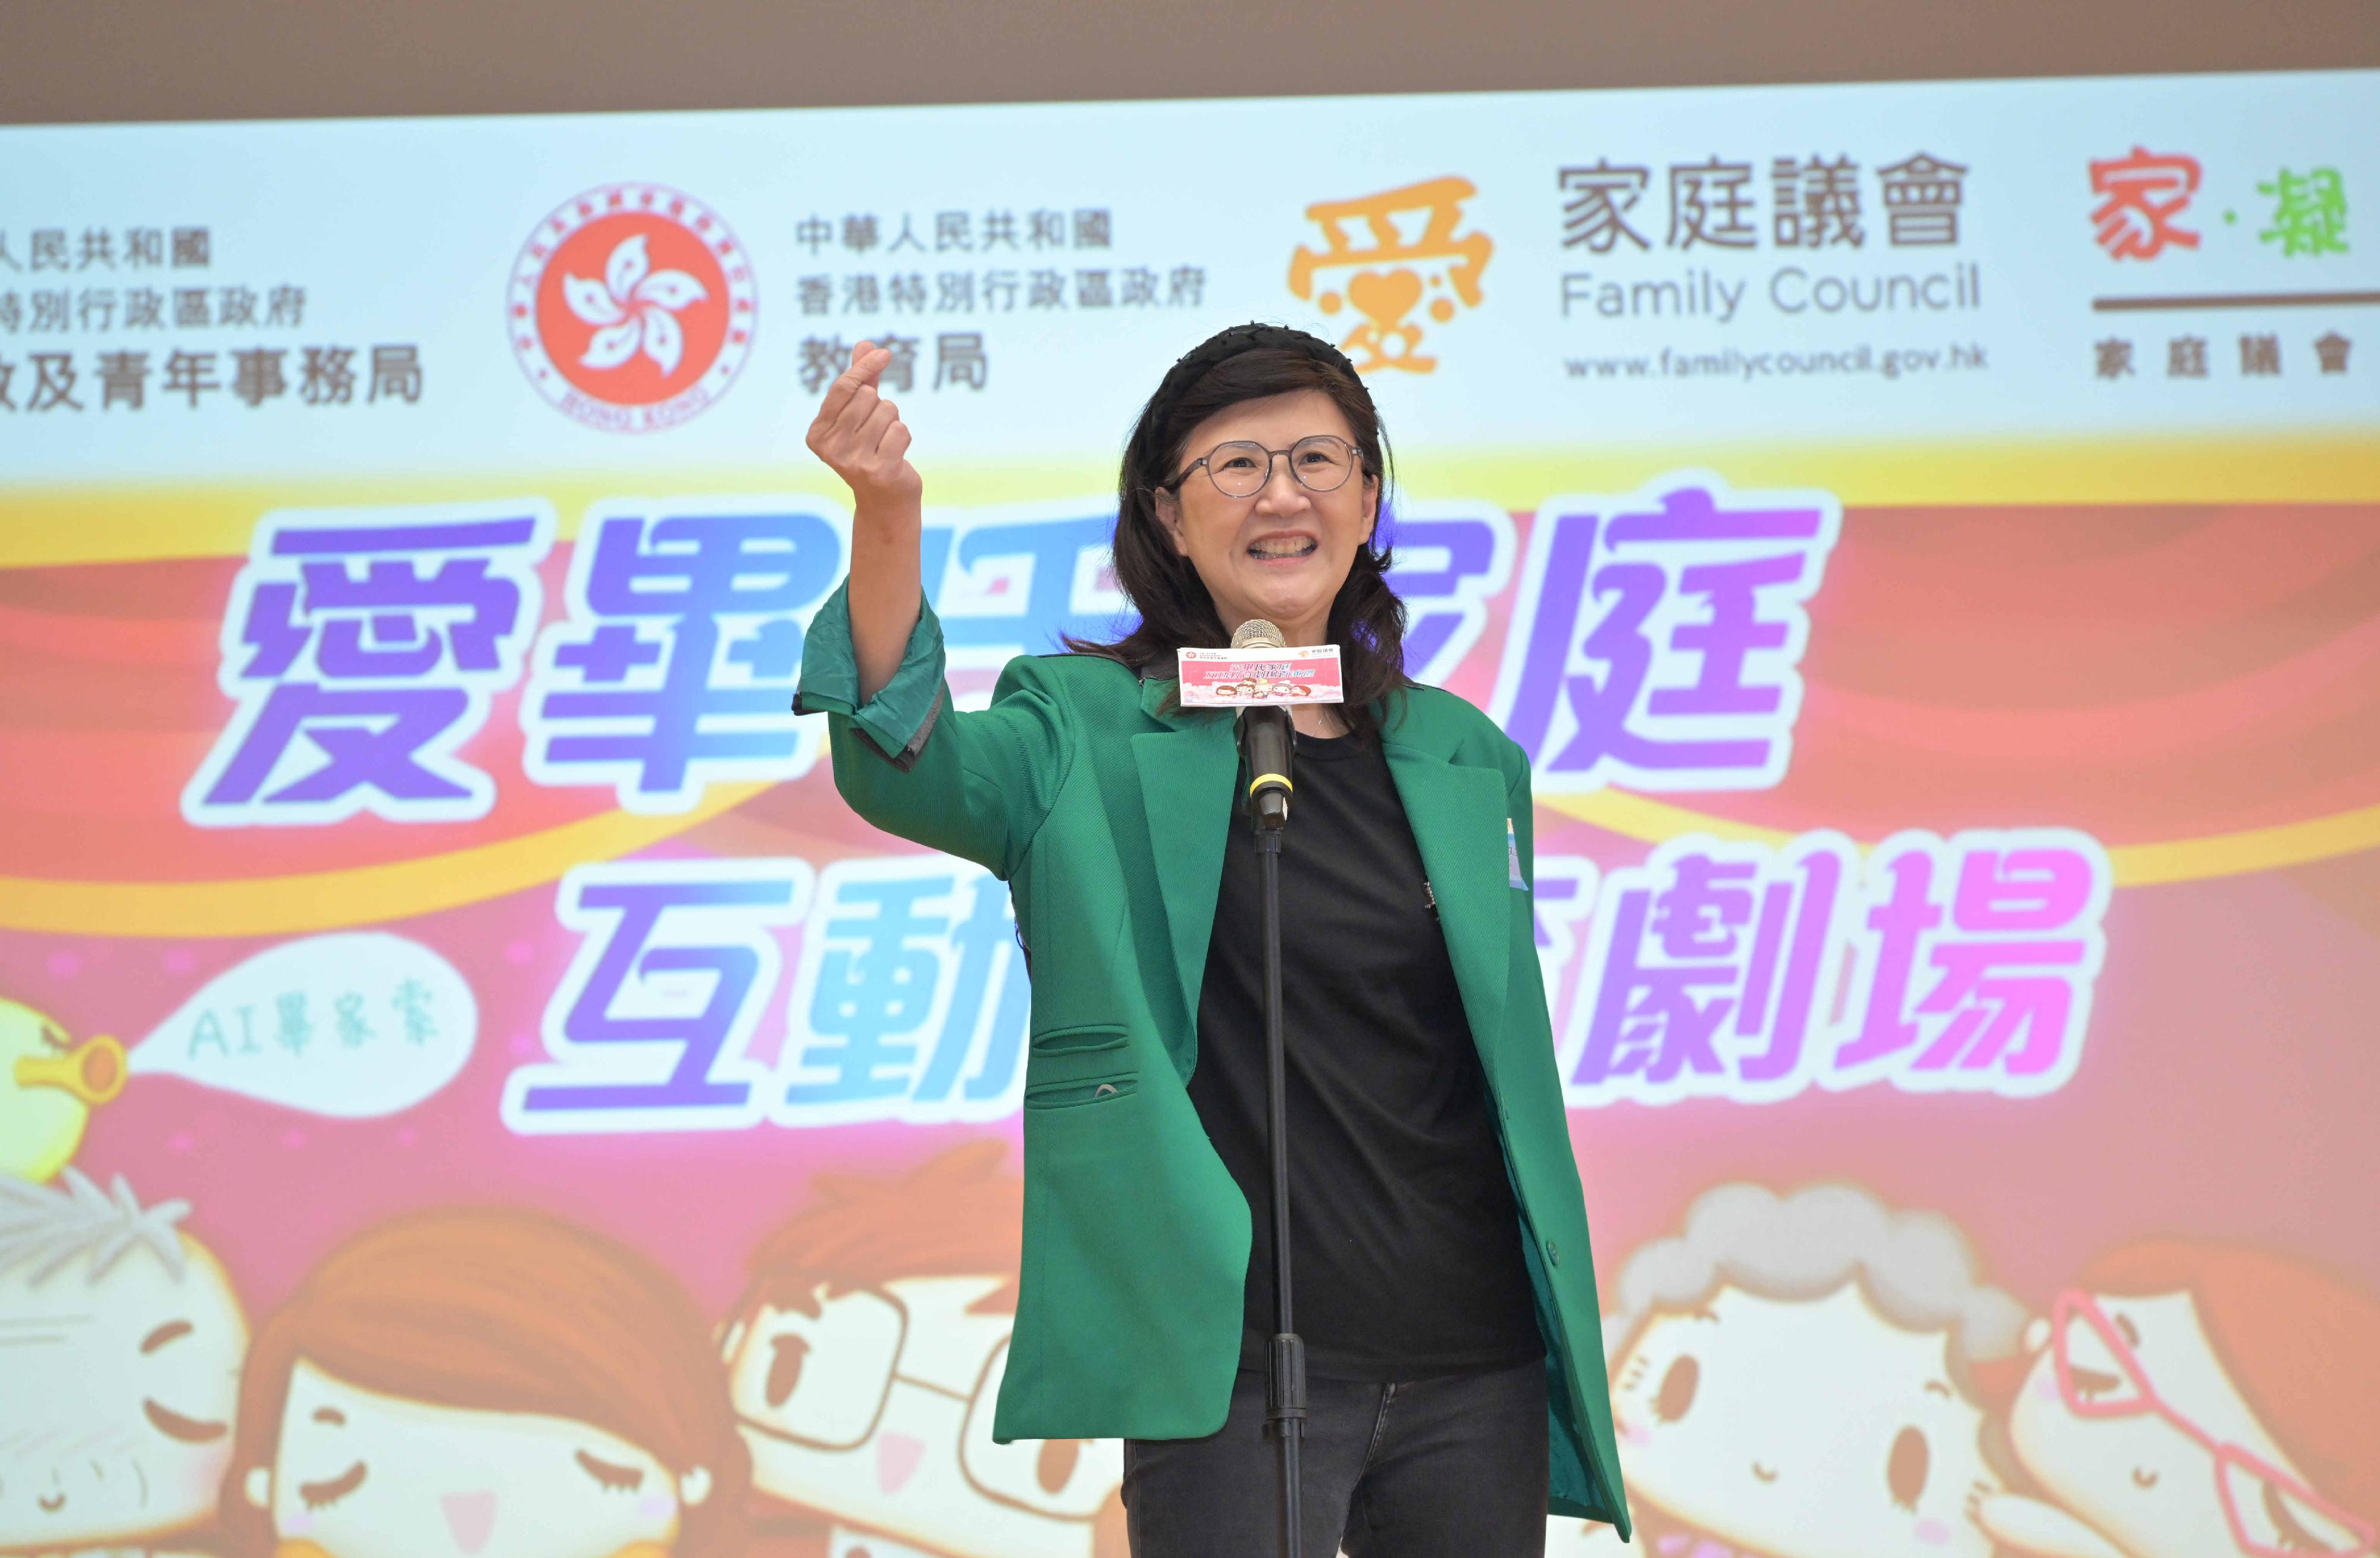 The Family Council's Roving Interactive Drama Series premiered at St. Paul's College this afternoon (February 18). Photo shows the Chairperson of the Family Council, Ms Melissa Pang, delivering a speech at the premiere.
